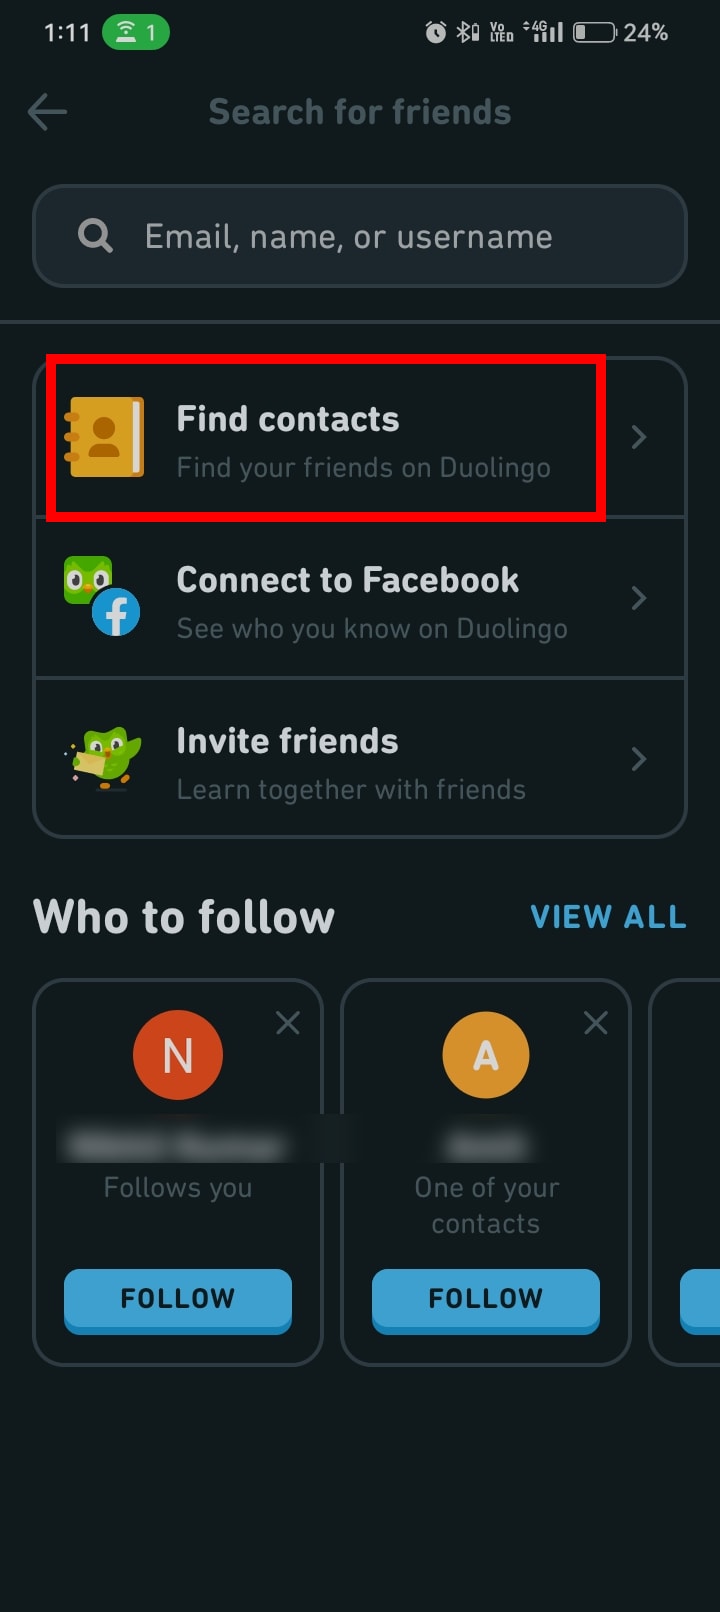 Among the four options, tap on Find contacts